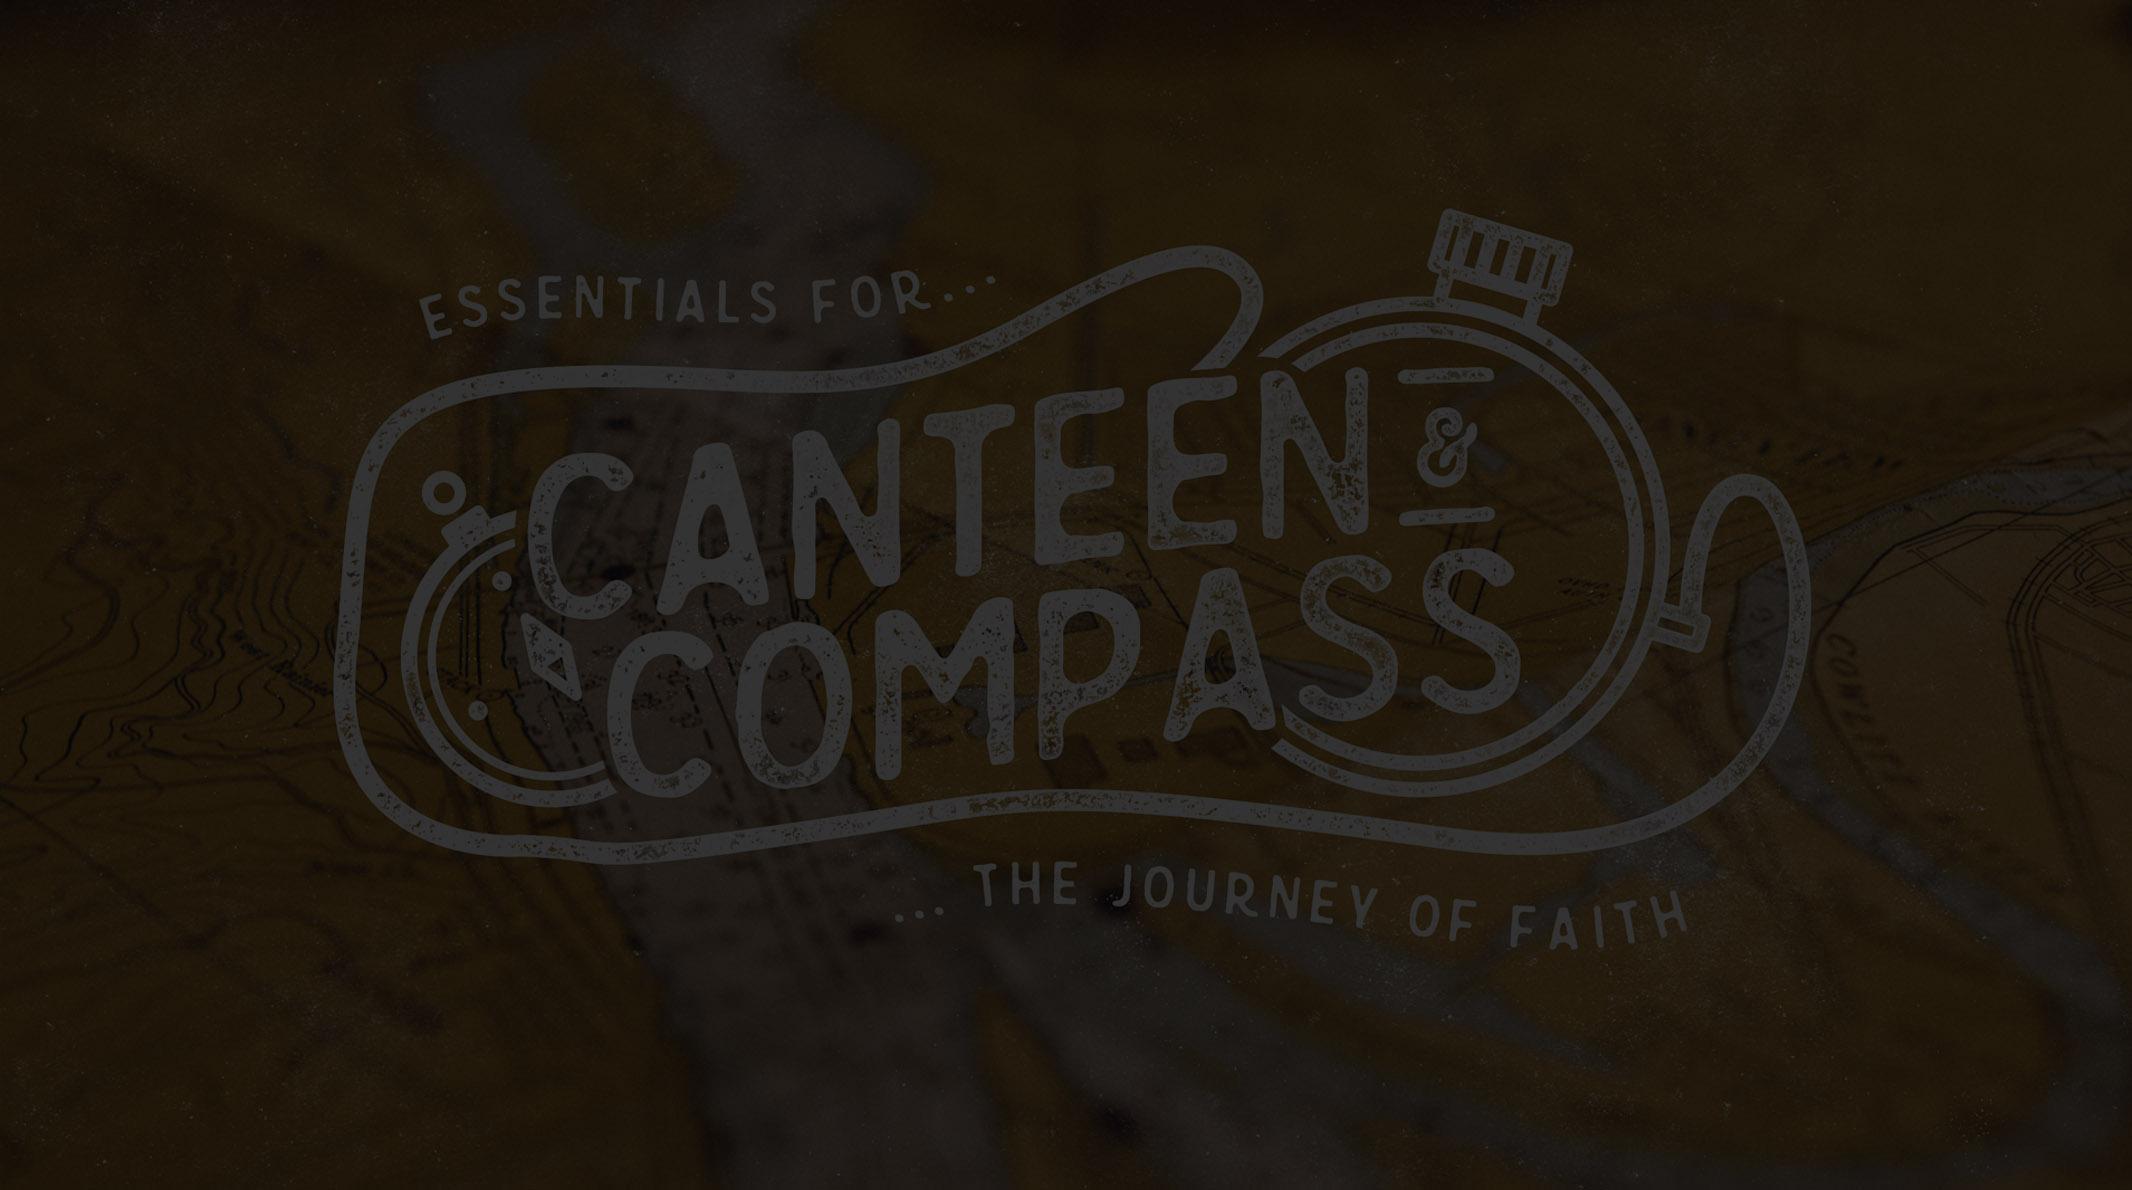 Compass Canteen Logo - Series Page] Canteen and Compass - MISSION